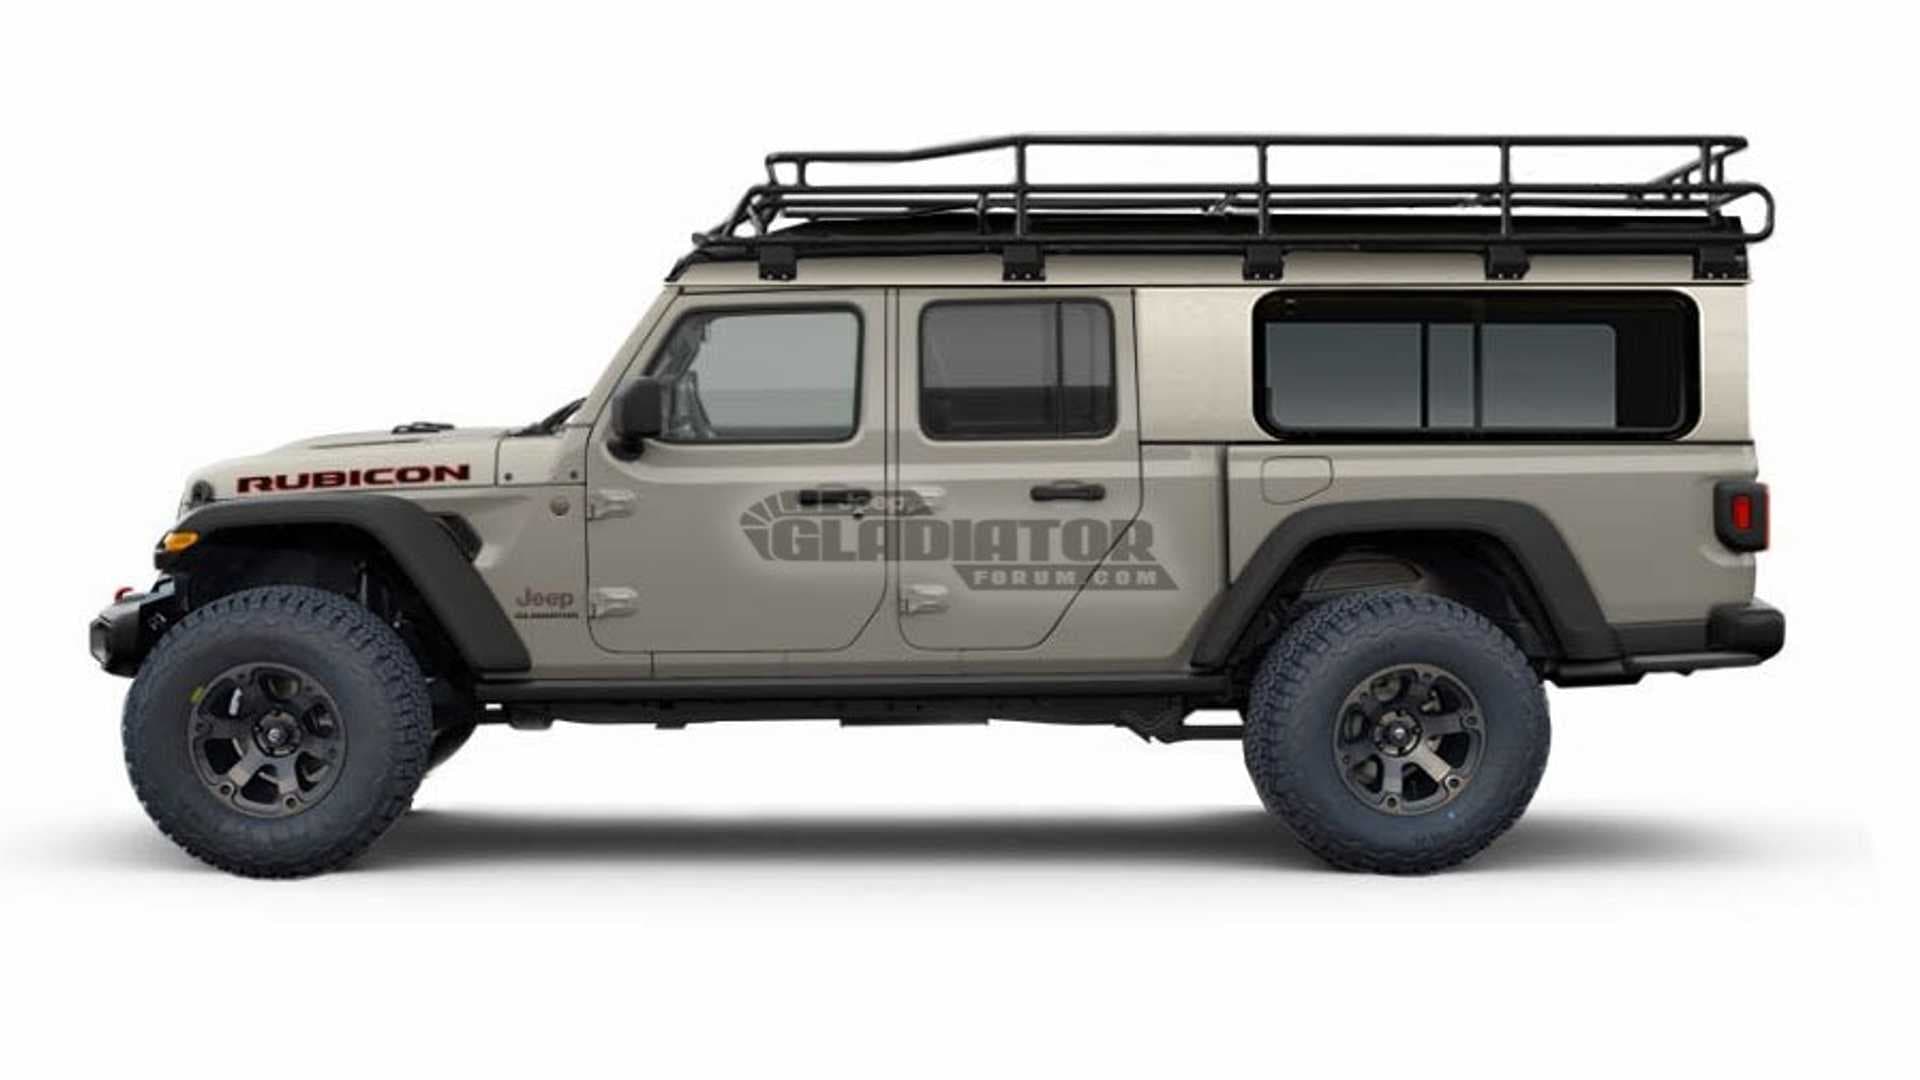 2020 Jeep Gladiator Looks Like the Perfect Adventure Truck in These Fresh Renders